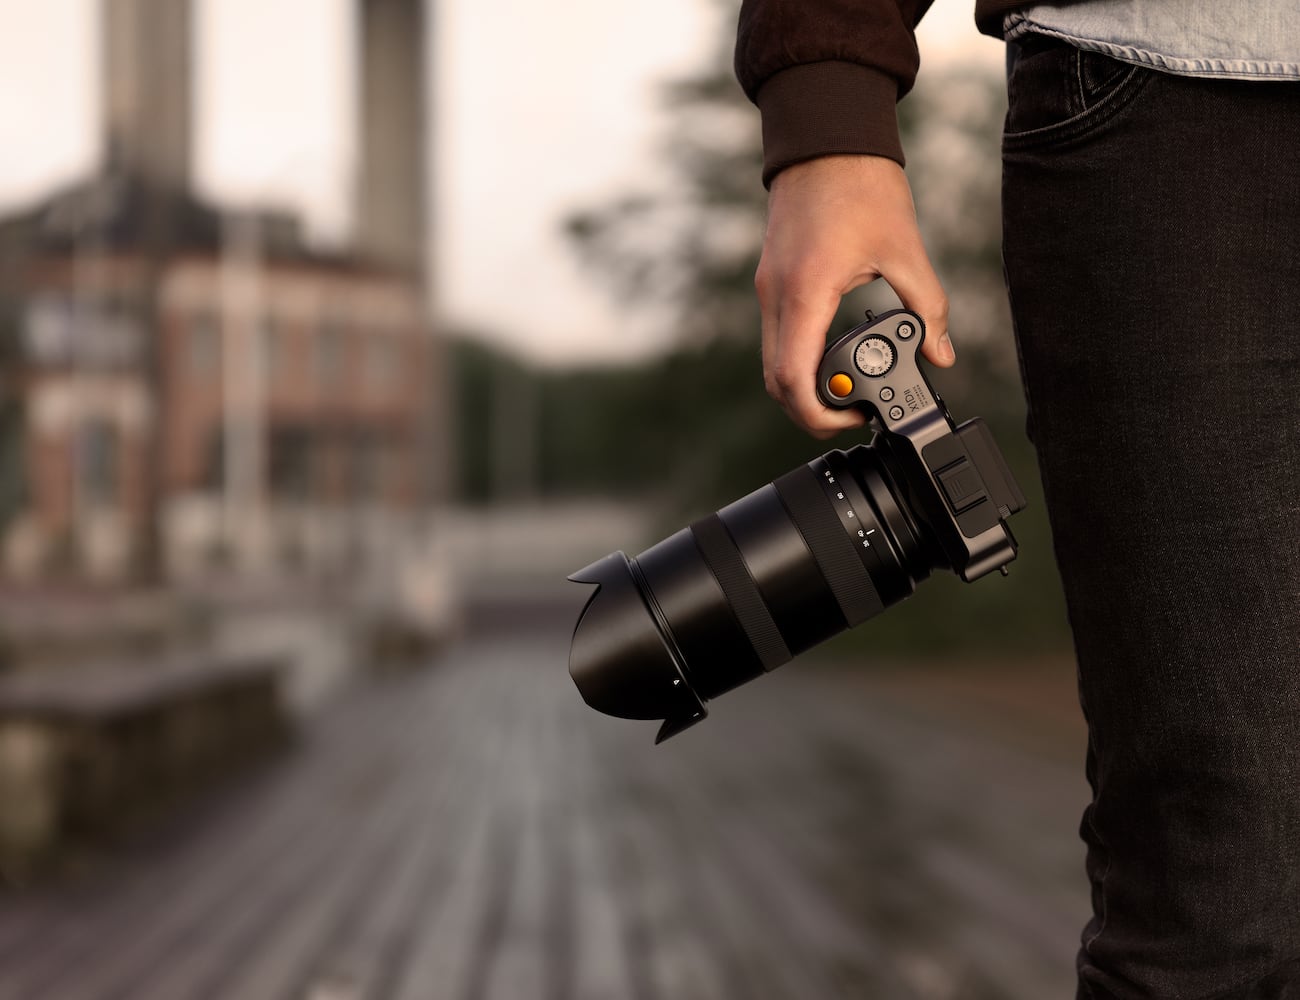 Hasselblad X1D II 50C Medium Format Camera is both powerful and portable